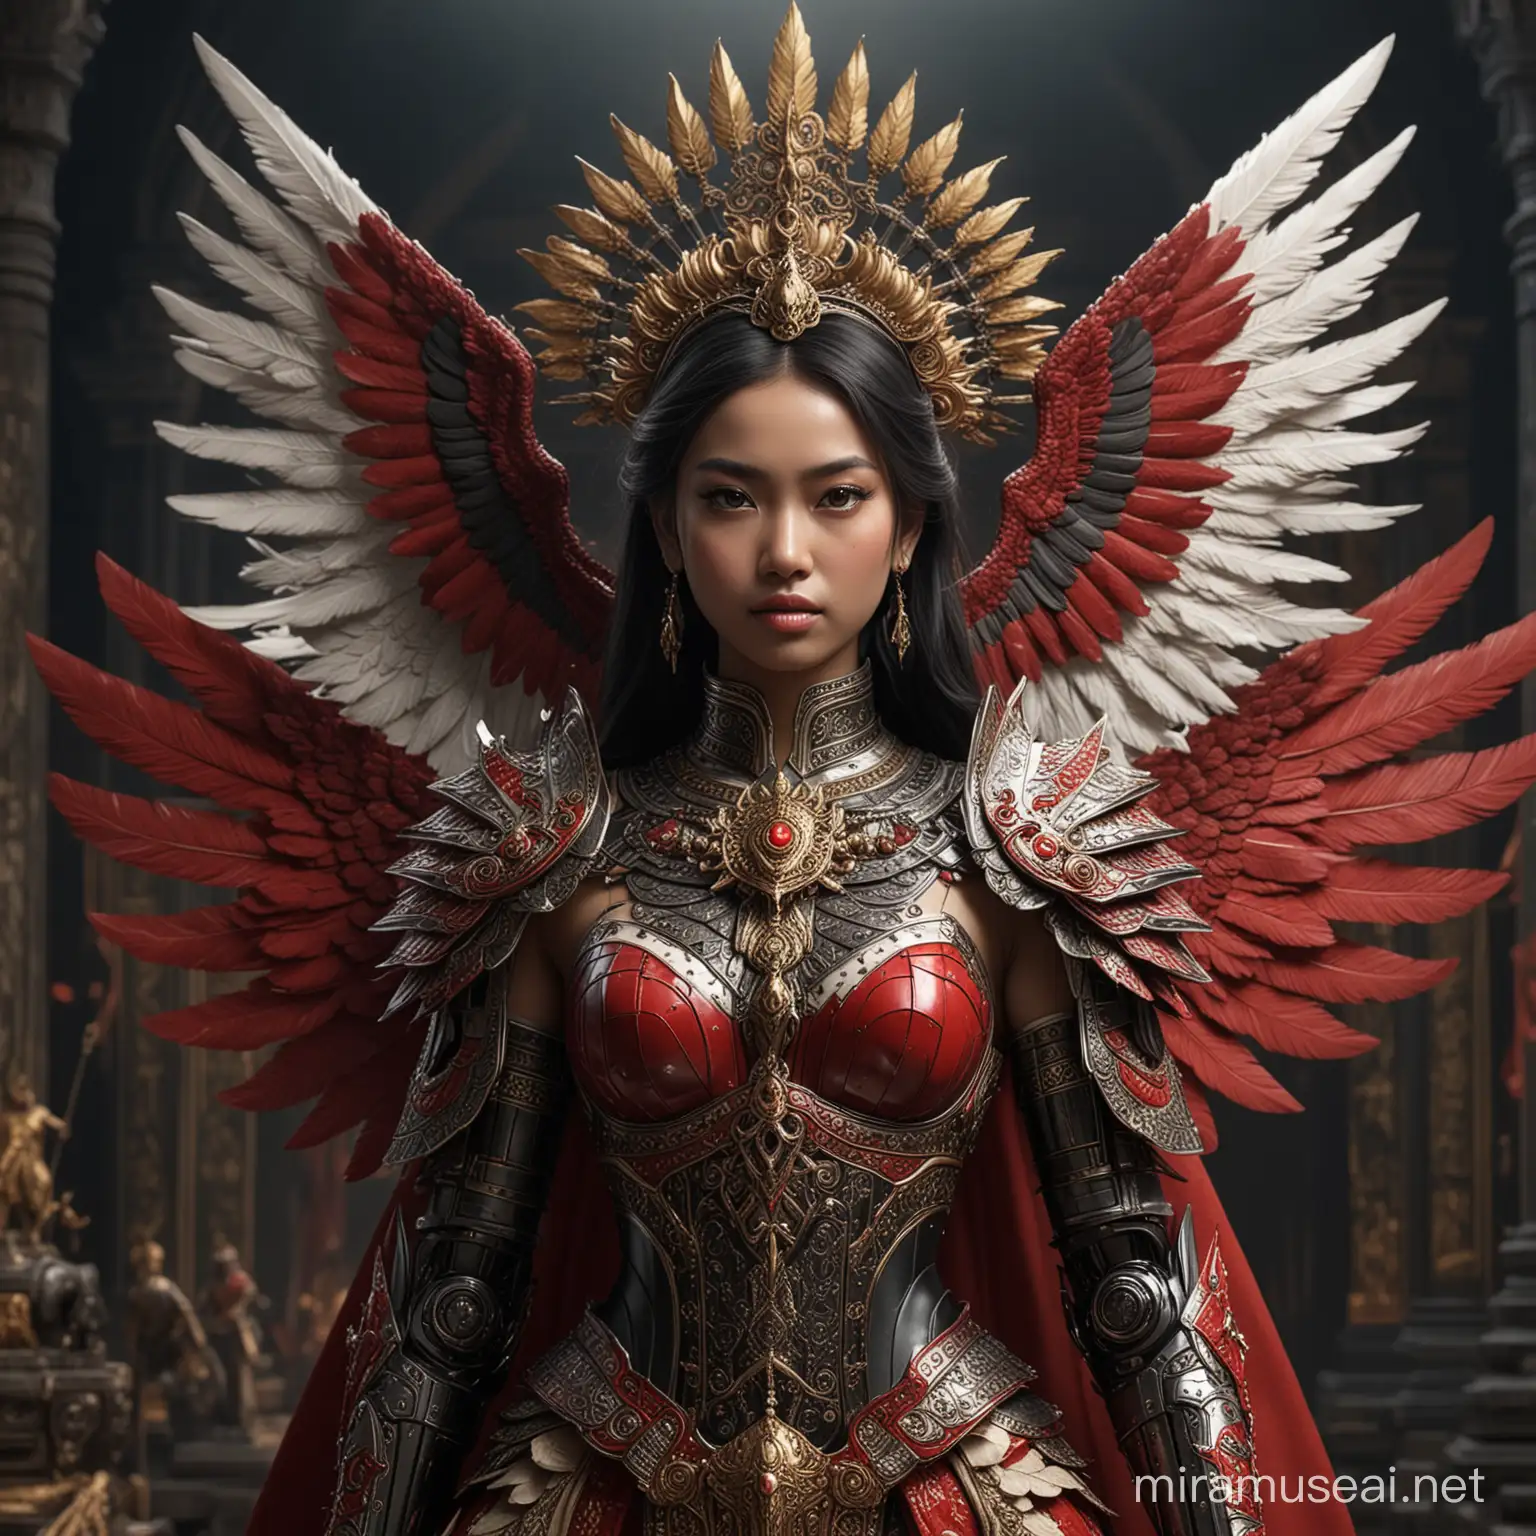 Majestic Indonesian Princess Queen with Garuda Robot in Ancient Majapahit Kingdom